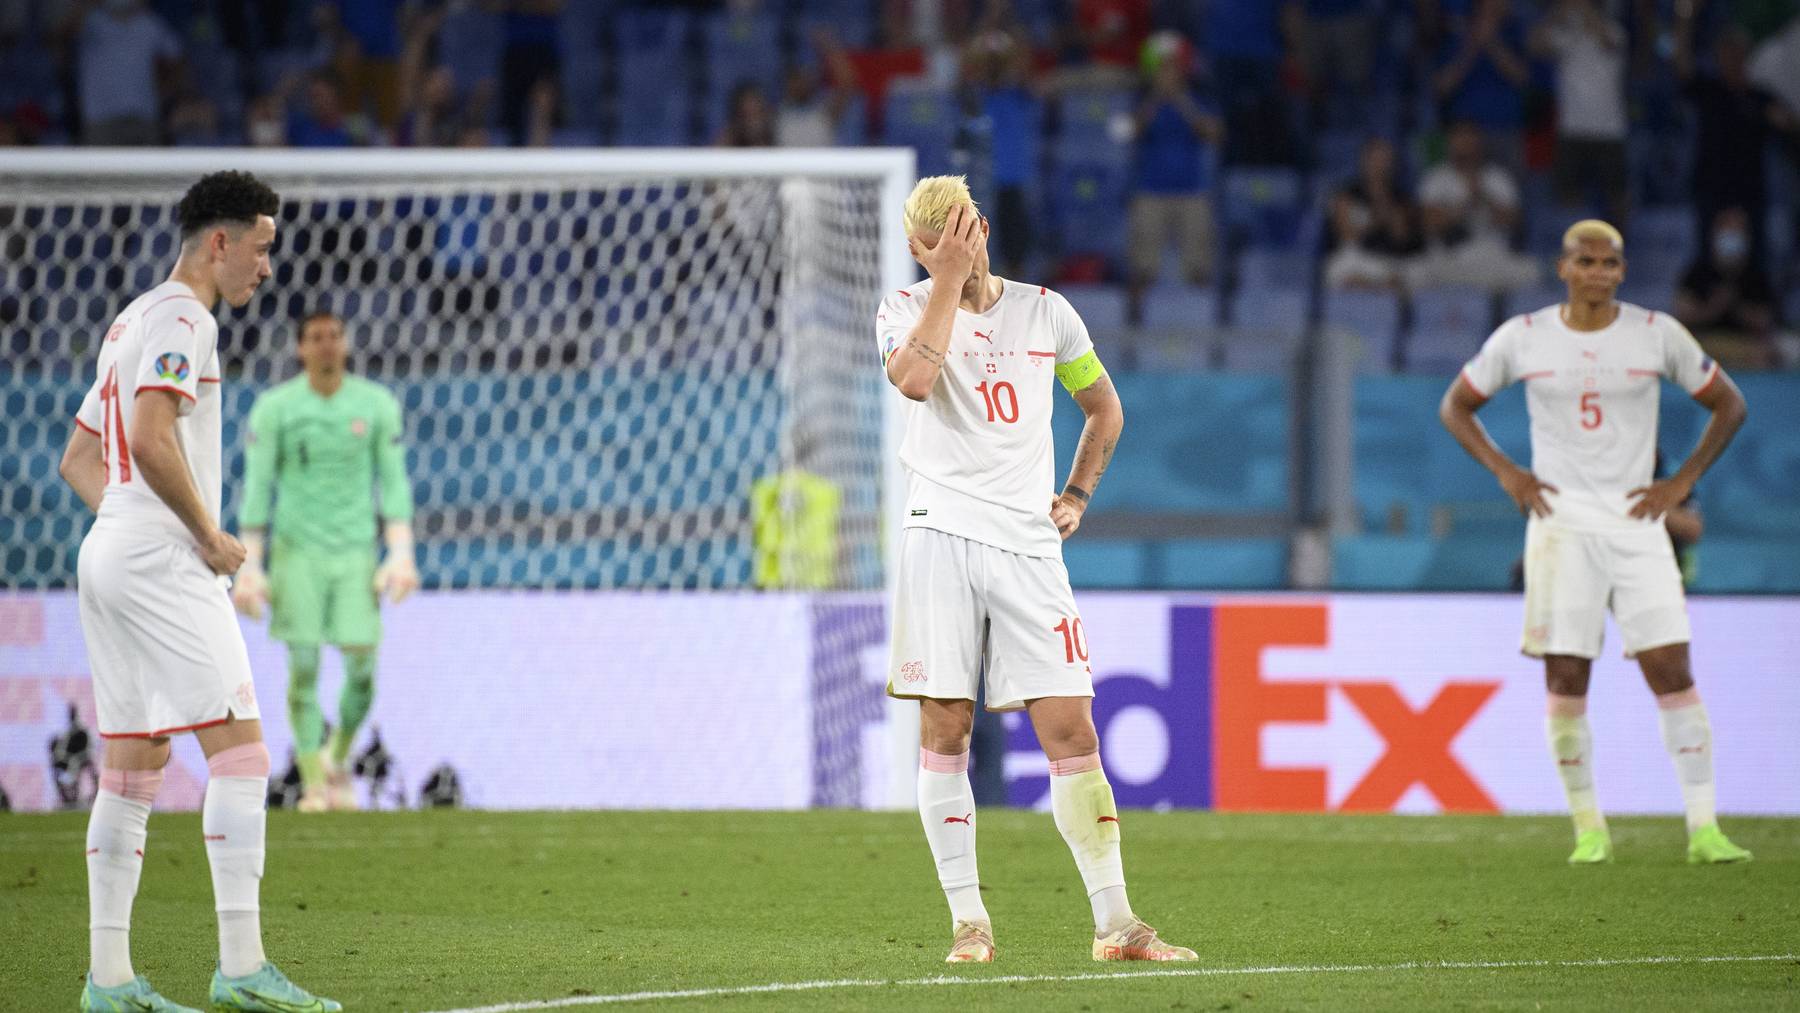 From left, Switzerland's midfielder Ruben Vargas, Switzerland's midfielder Granit Xhaka and Switzerland's defender Manuel Akanji, are disappointed after conceding Italy's third goal during the Euro 2020 soccer tournament group A match between Italy and Switzerland at the Olympic stadium, in Rome, Italy, Wednesday, June 16, 2021.